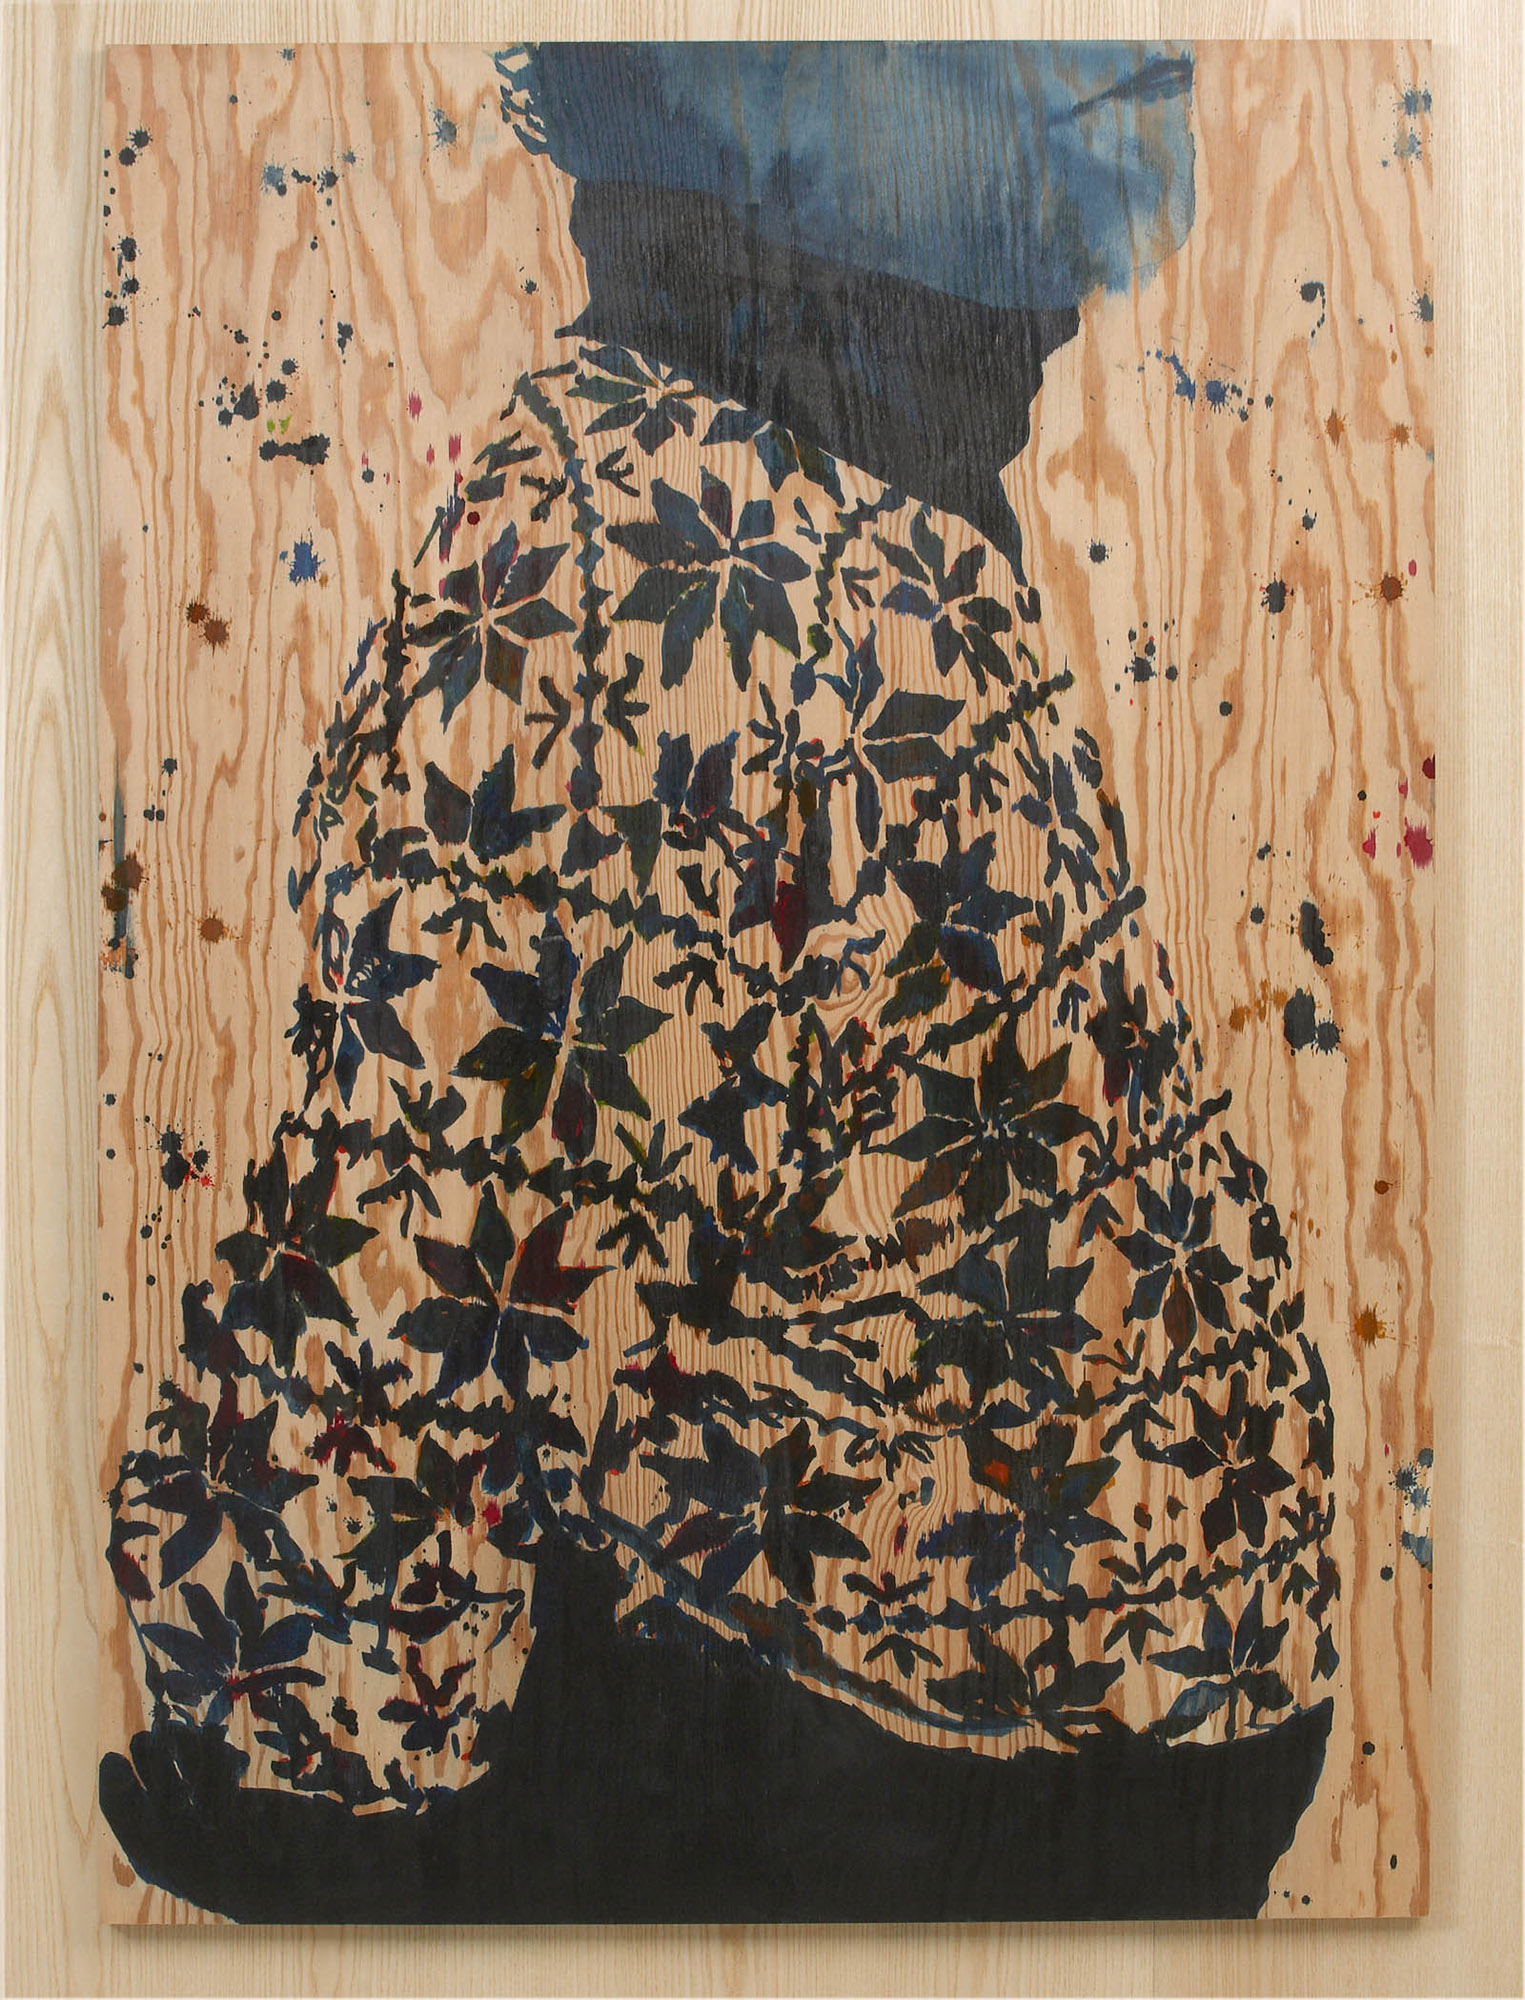 Painting on wood of an overweight person wearing a cardigan. Robert Lucander, 13 paintings.